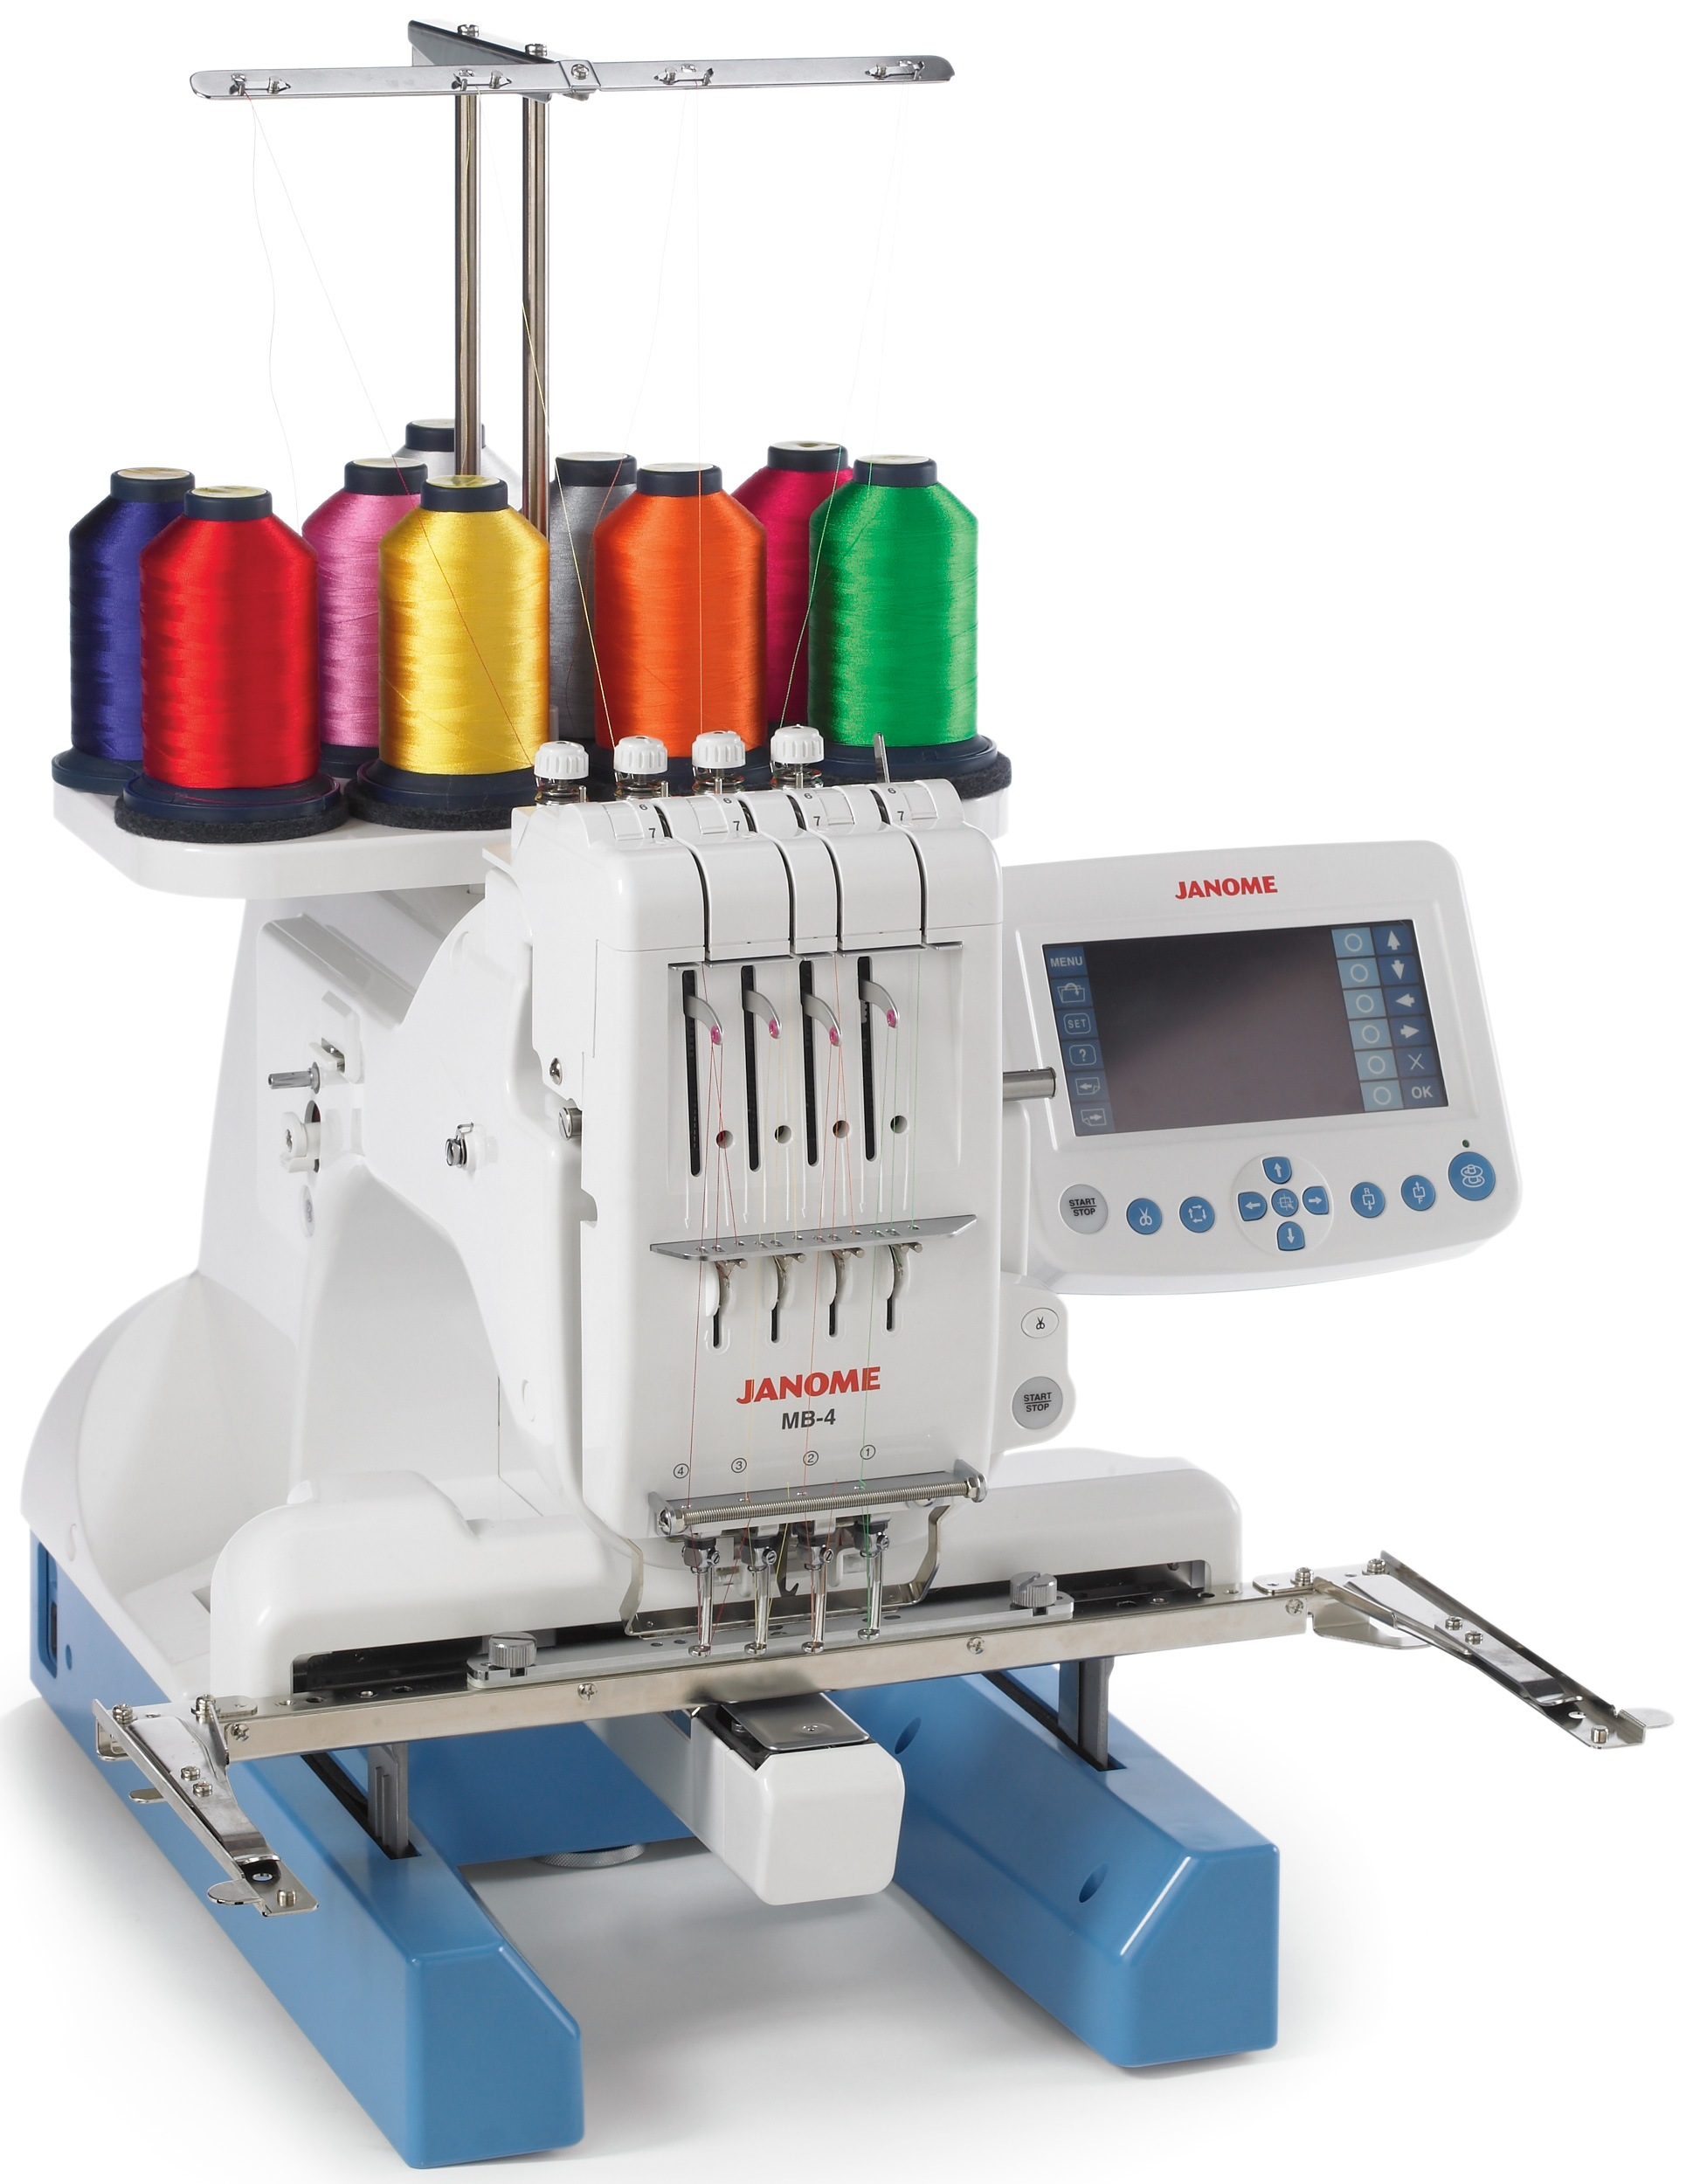 Janome Sewing Machine Review - Embroidery Sewing Machines